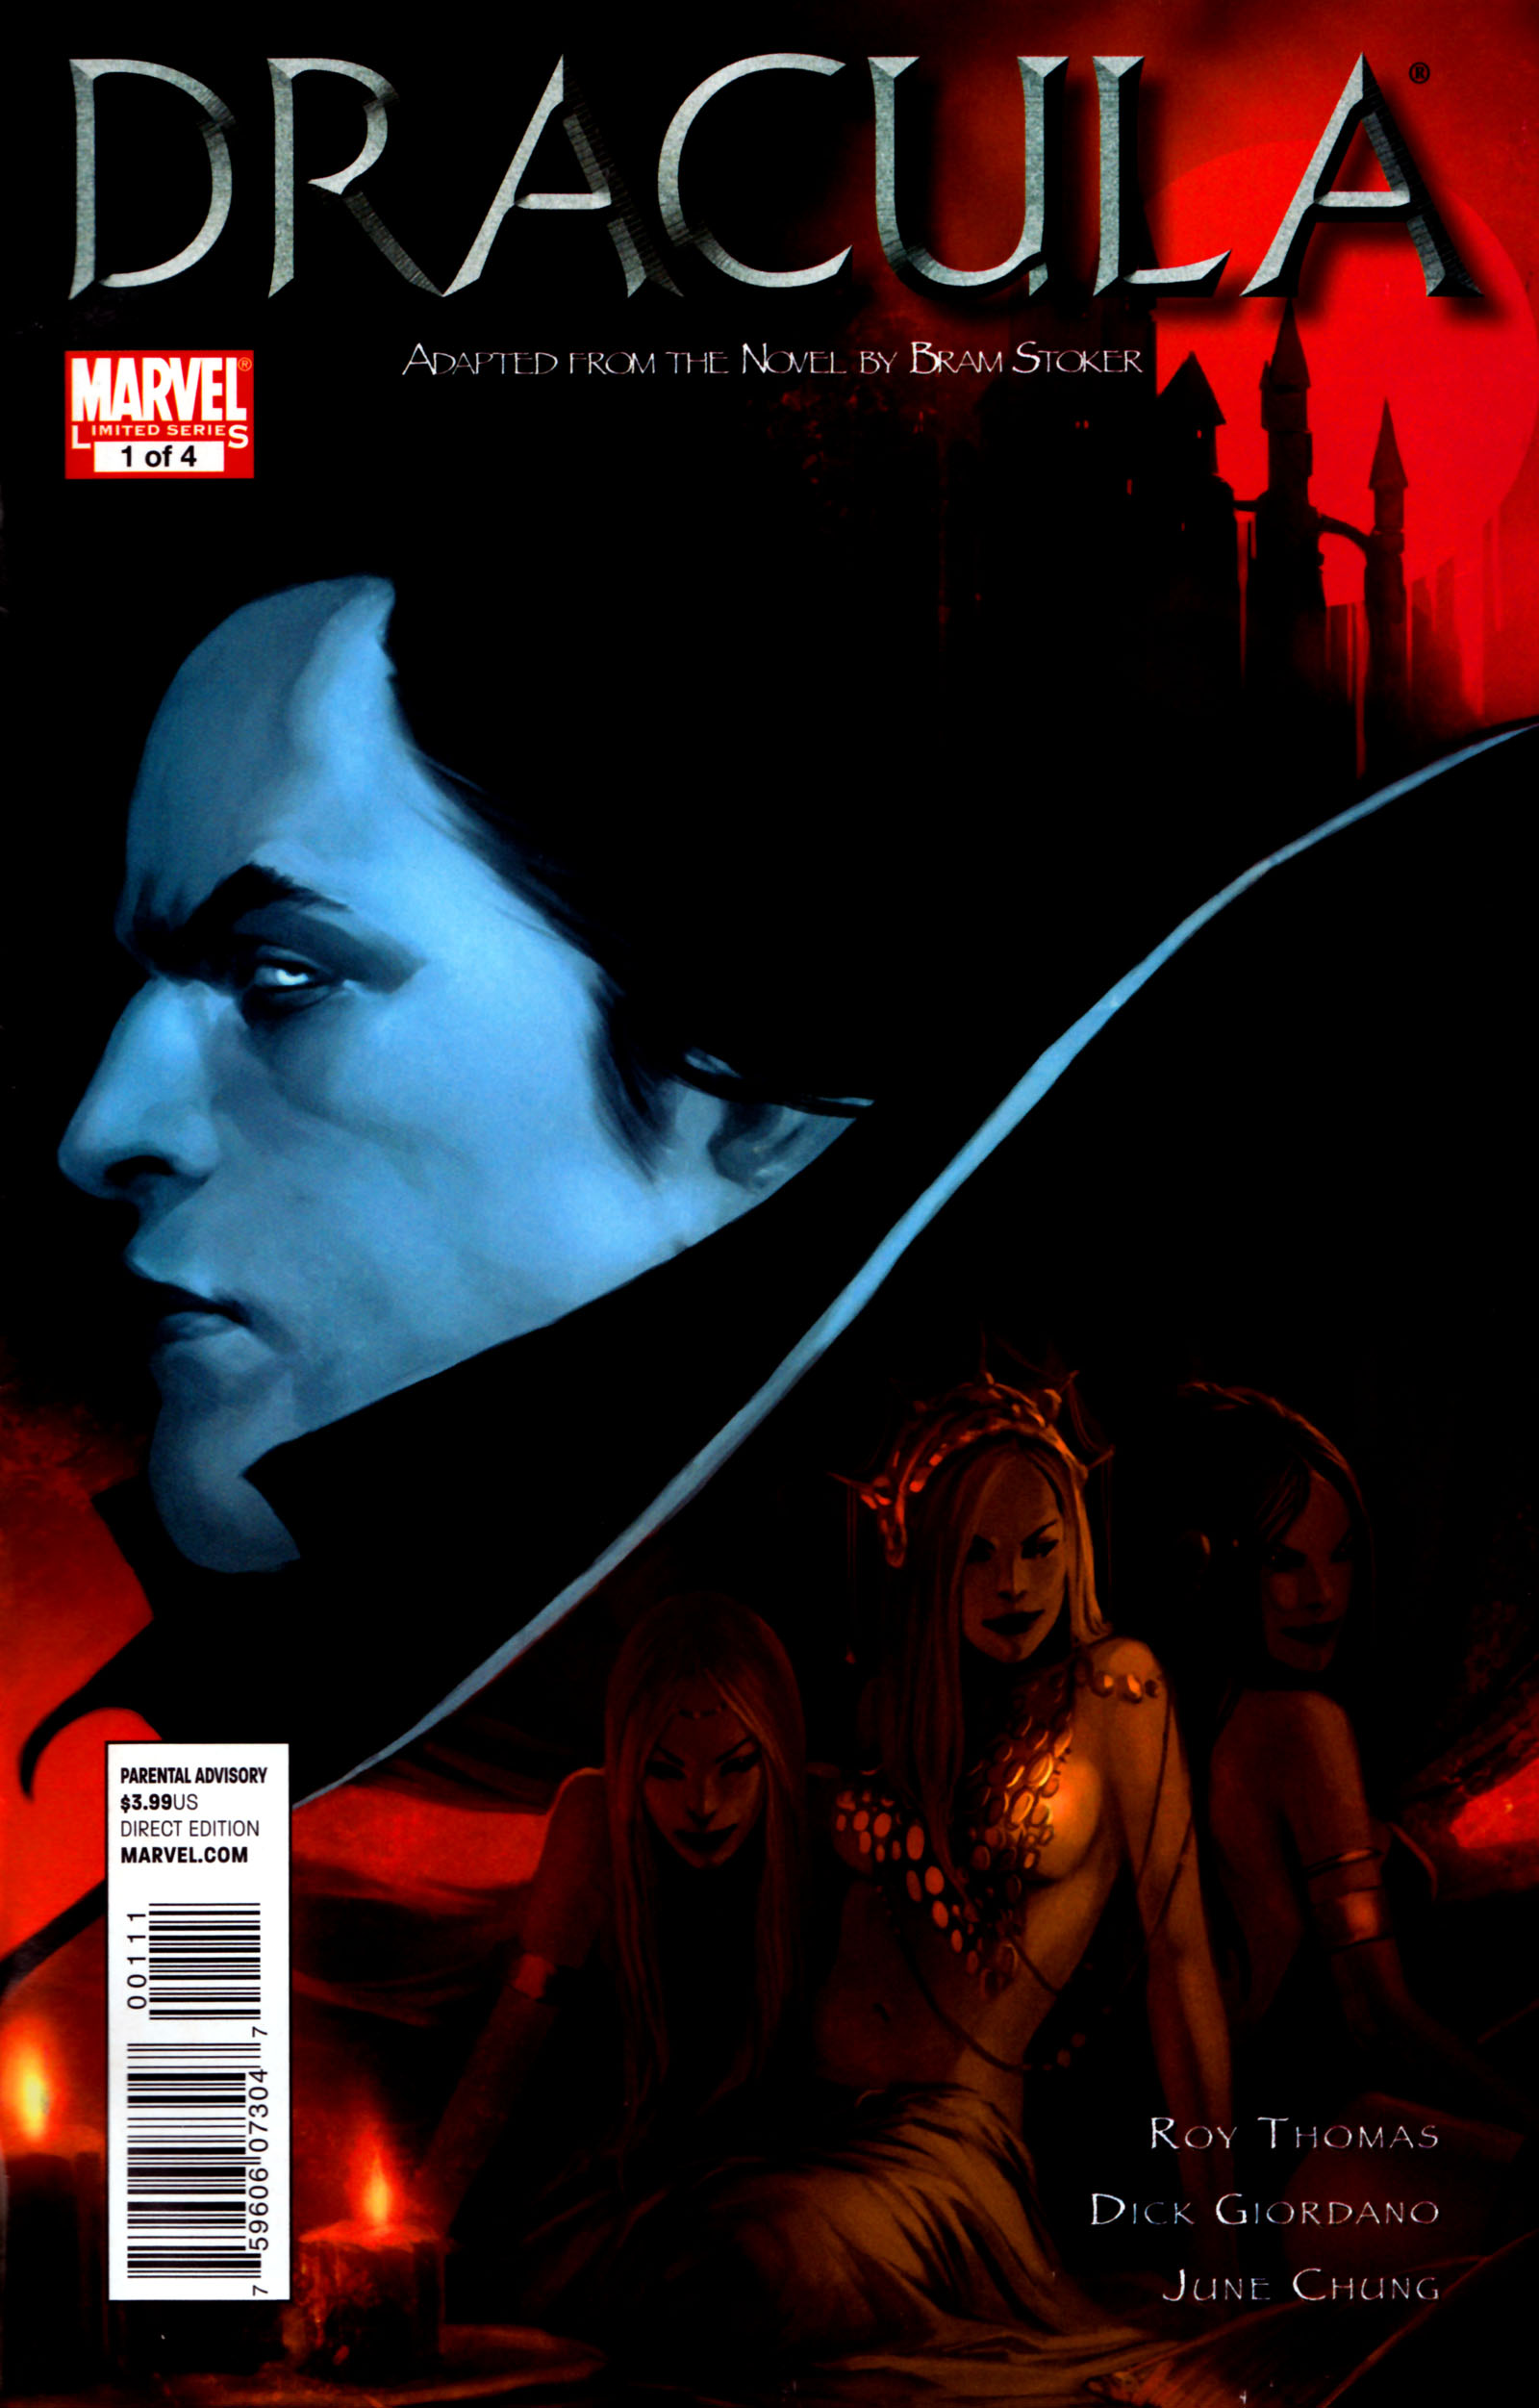 Read online Dracula comic -  Issue #1 - 1